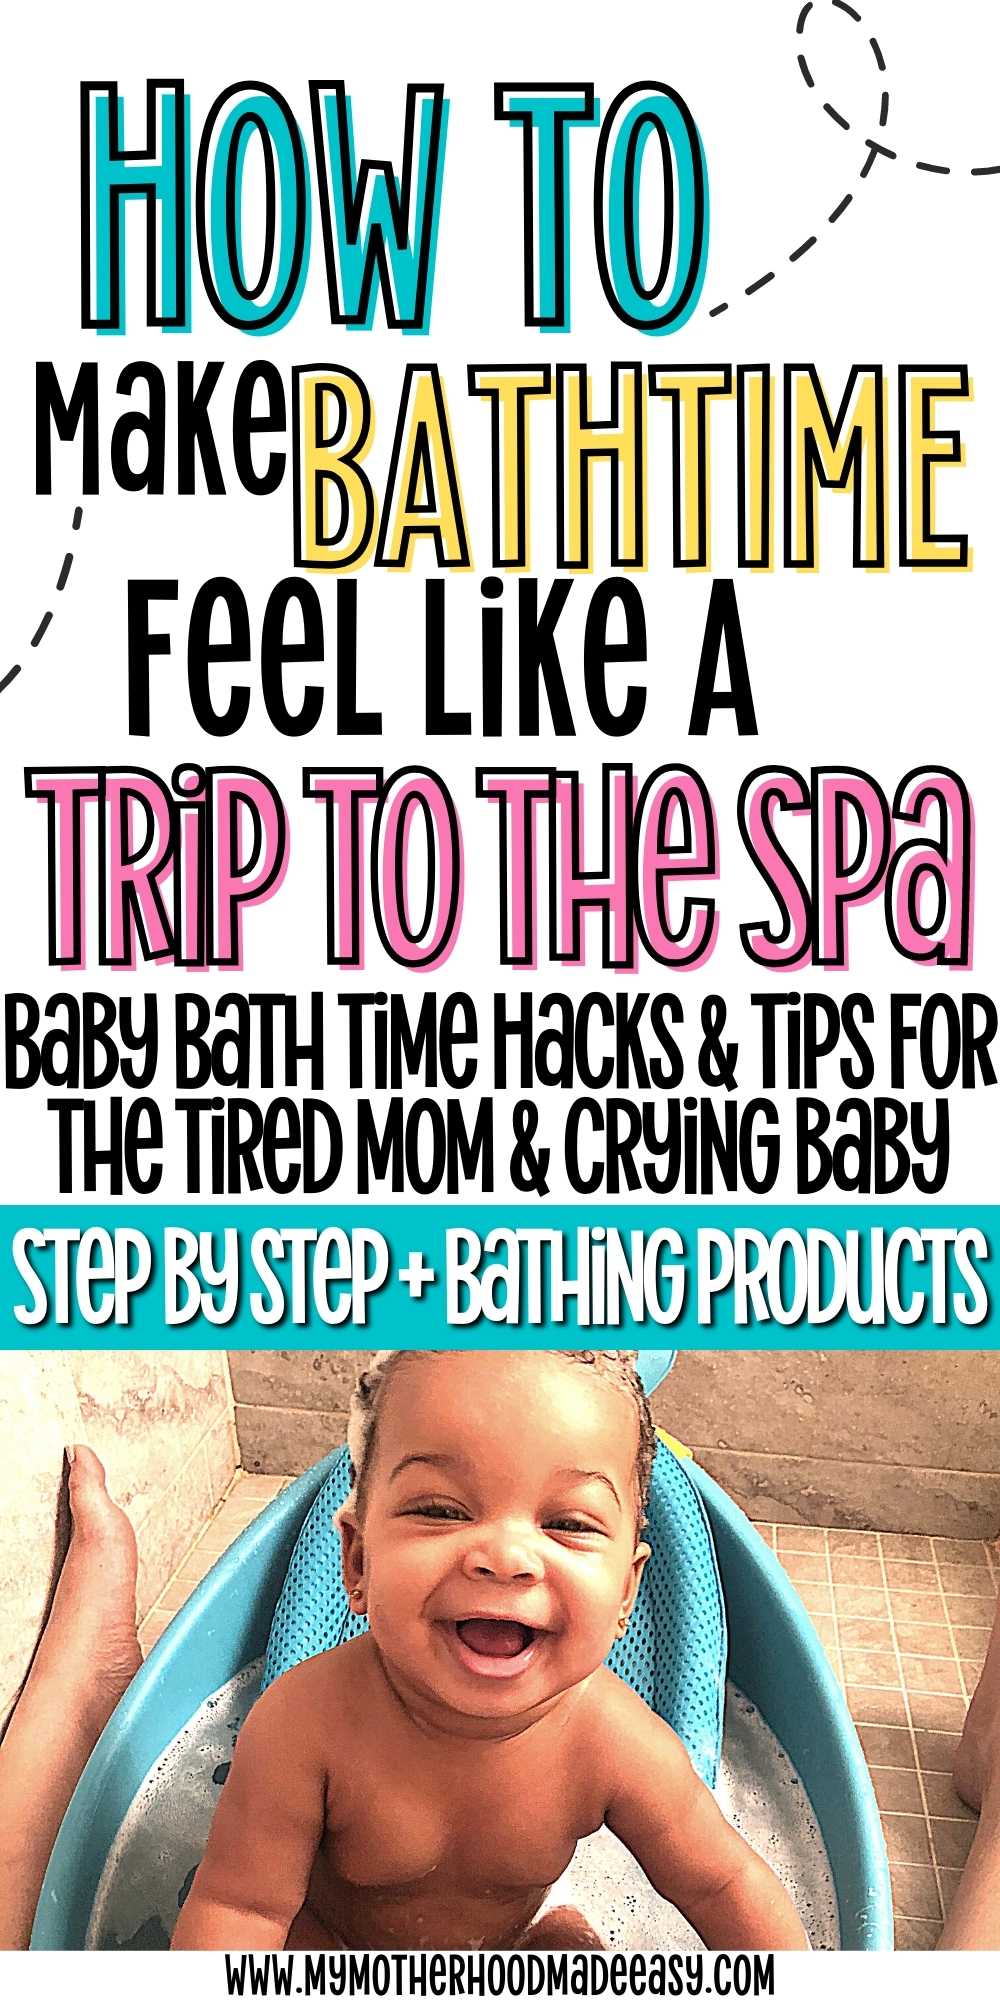 baby bath time - tips for new moms